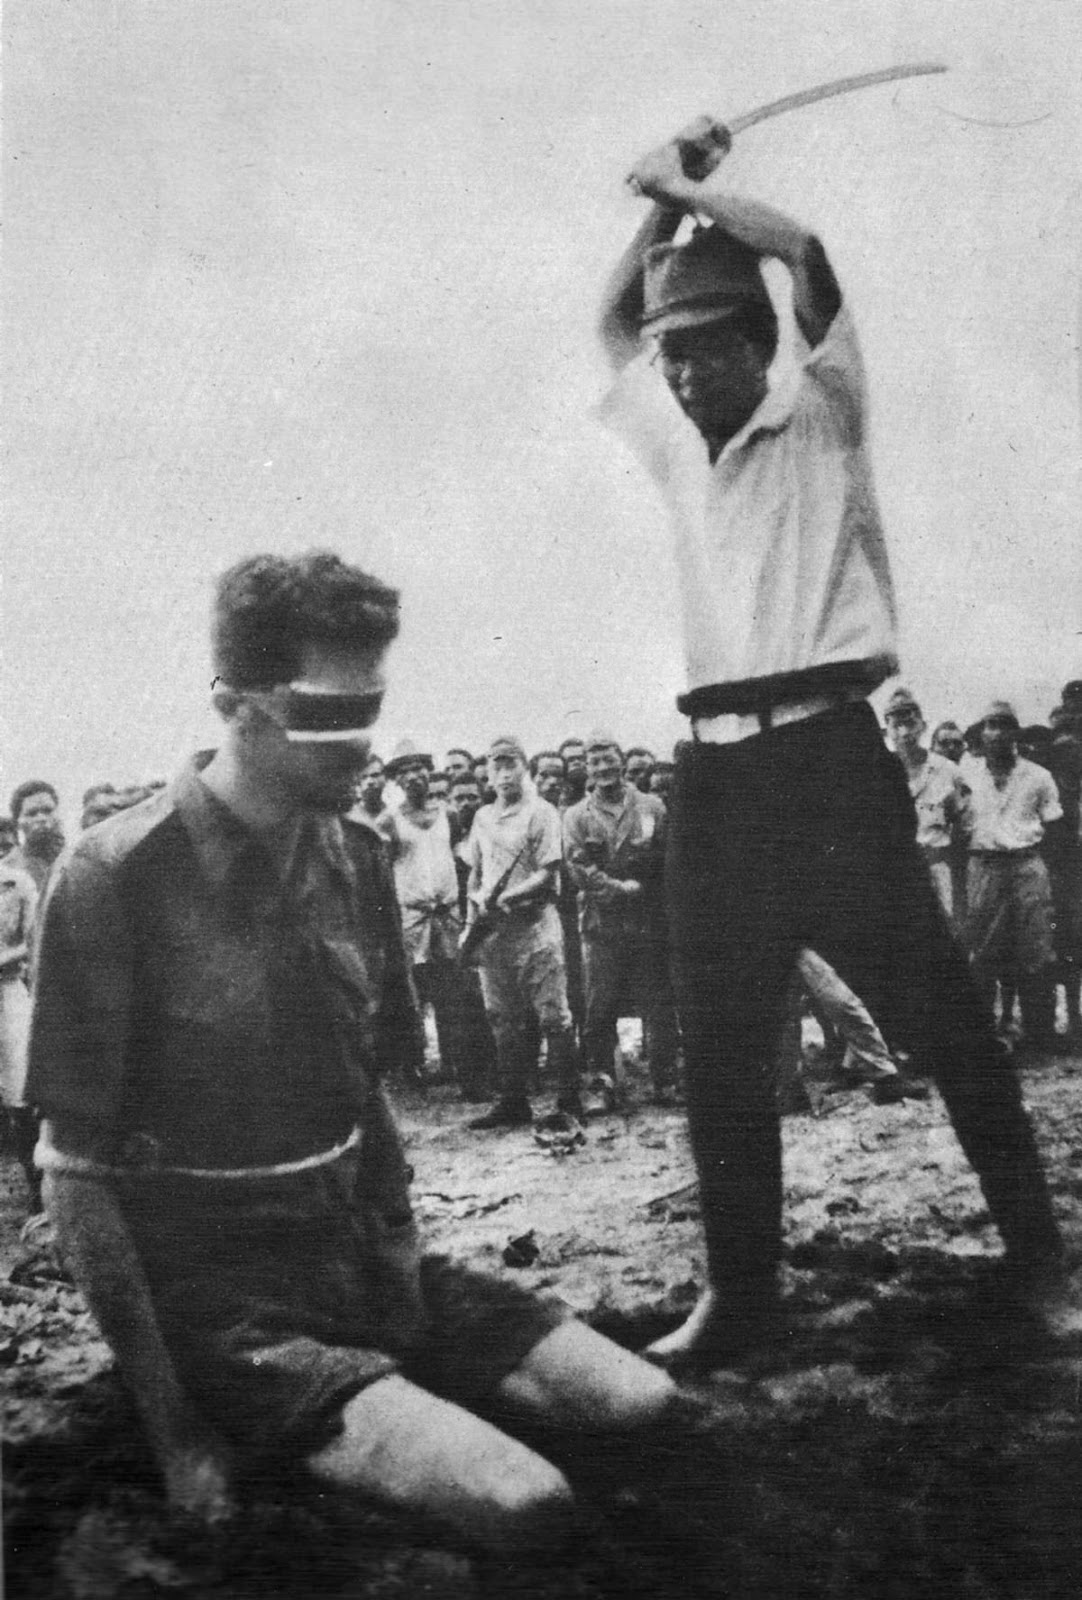 A photograph of the Japanese soldier Yasuno Chikao an instant before he strikes off Siffleet’s head was taken from the body of a Japanese casualty later in the war, 1943.